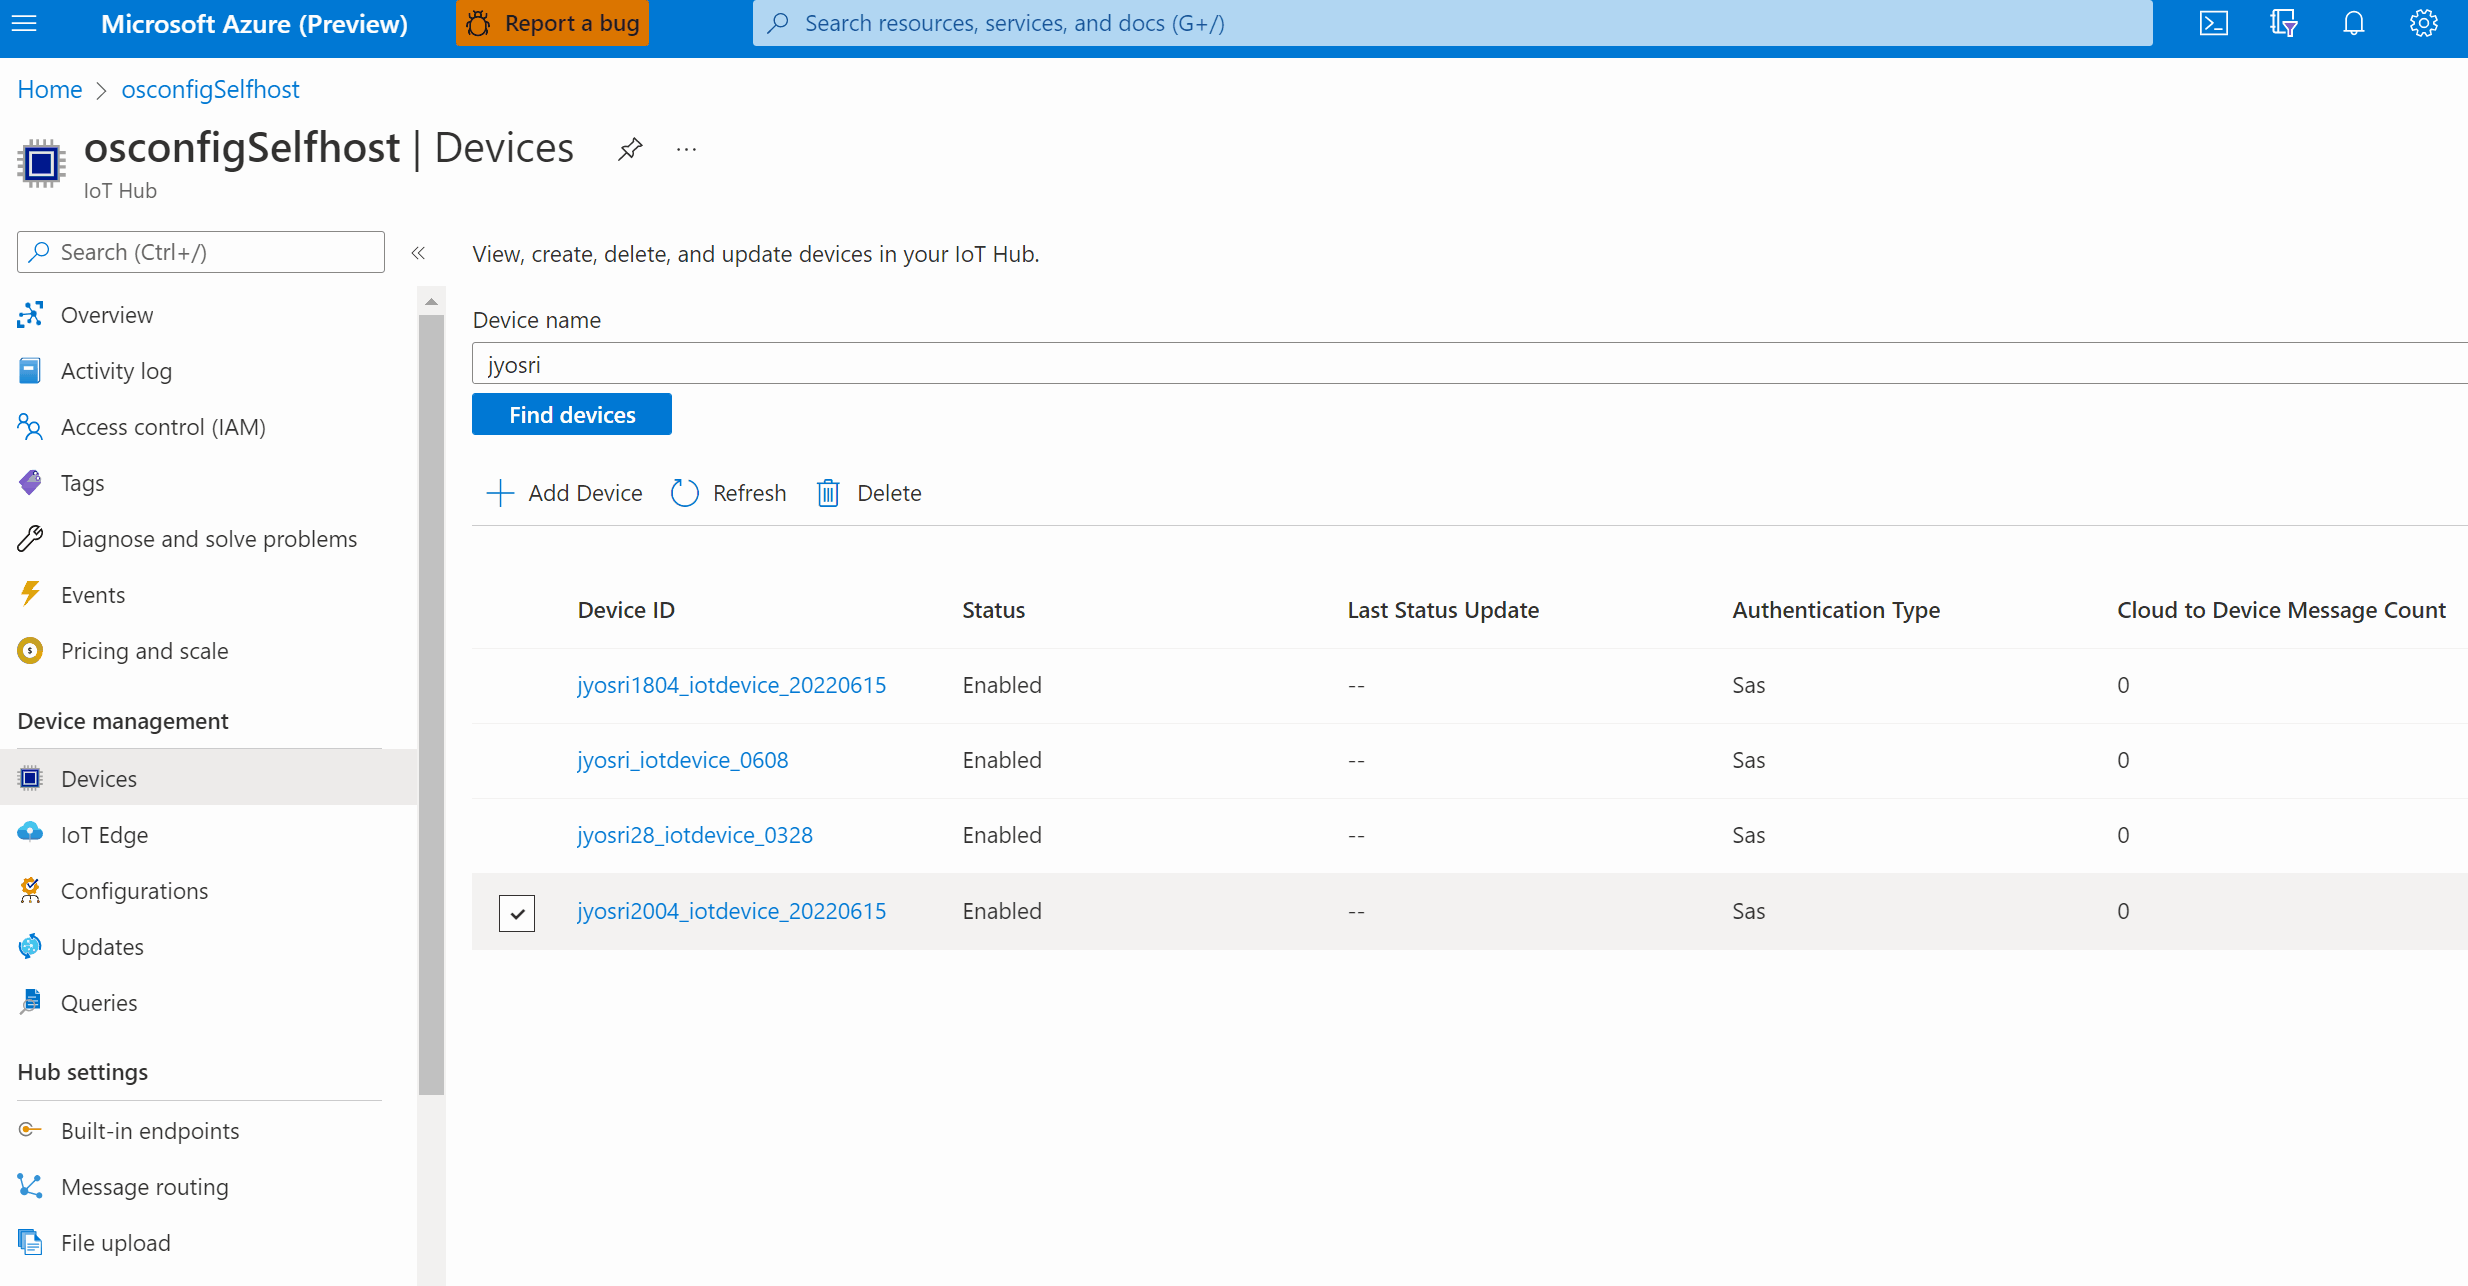 Screen capture showing the desired twin contents for a ping command using OSConfig module for a single device from Azure Portal